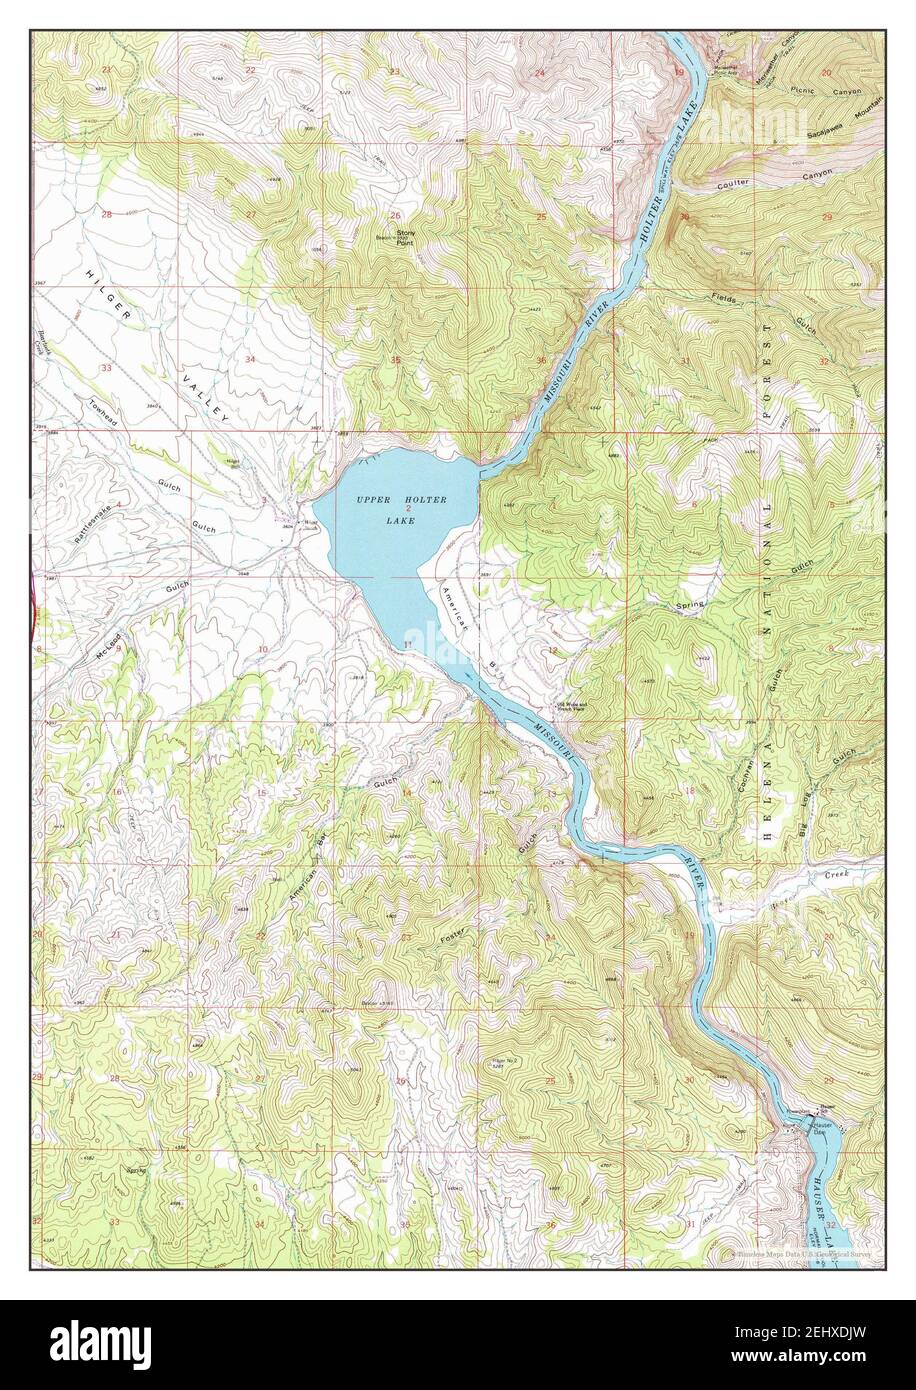 Upper Holter Lake Montana Map 1962 124000 United States Of America By Timeless Maps Data Us Geological Survey 2EHXDJW 